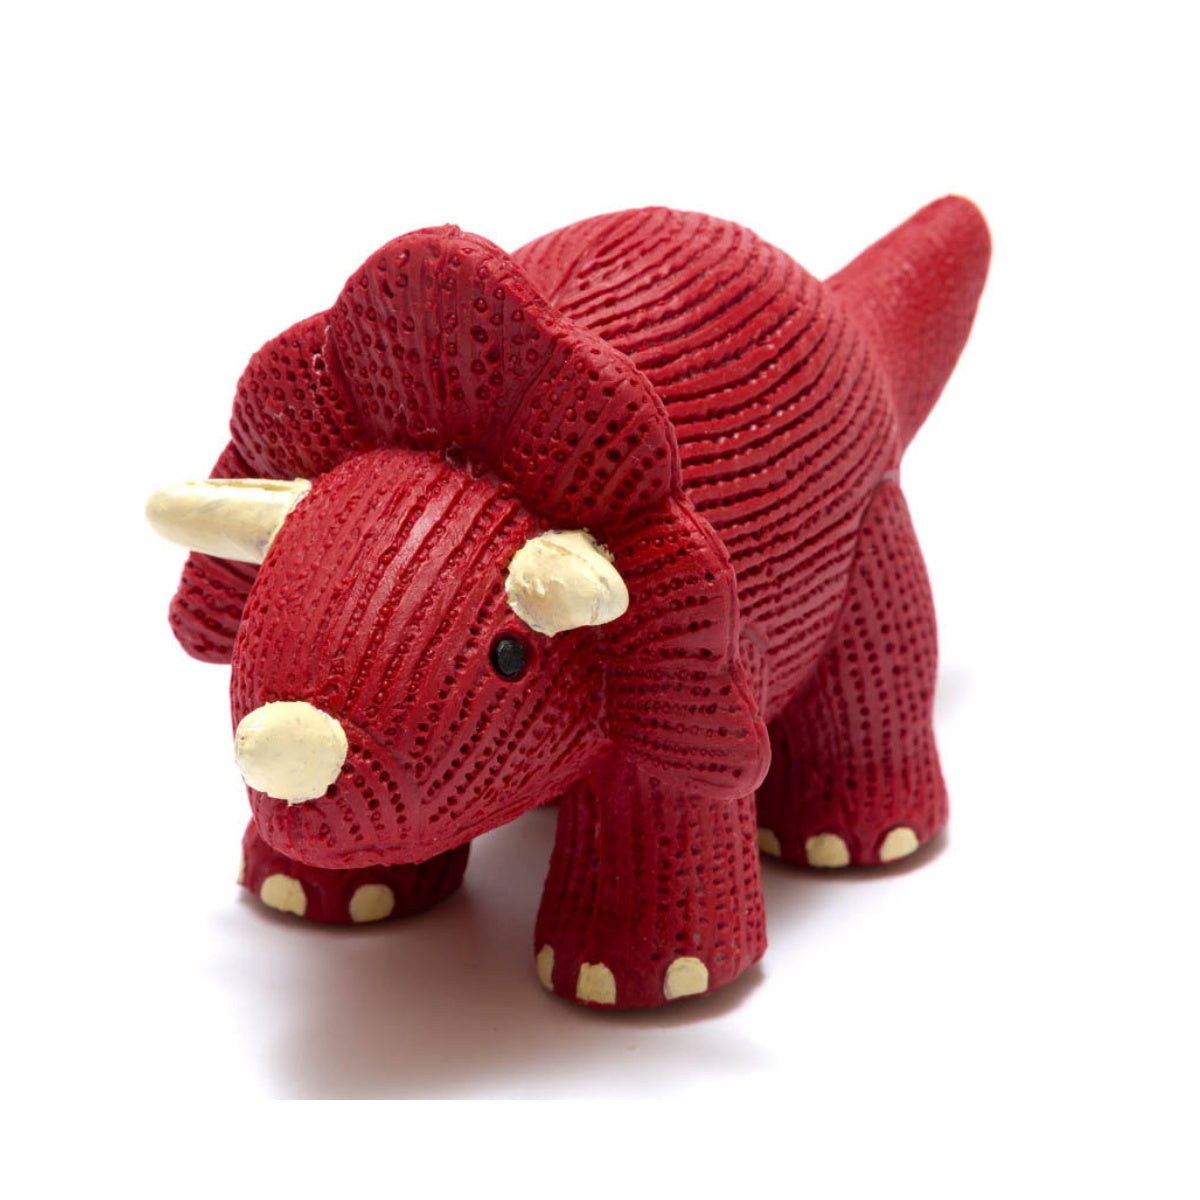 Natural Rubber Dinosaur Toy - Red Triceratops